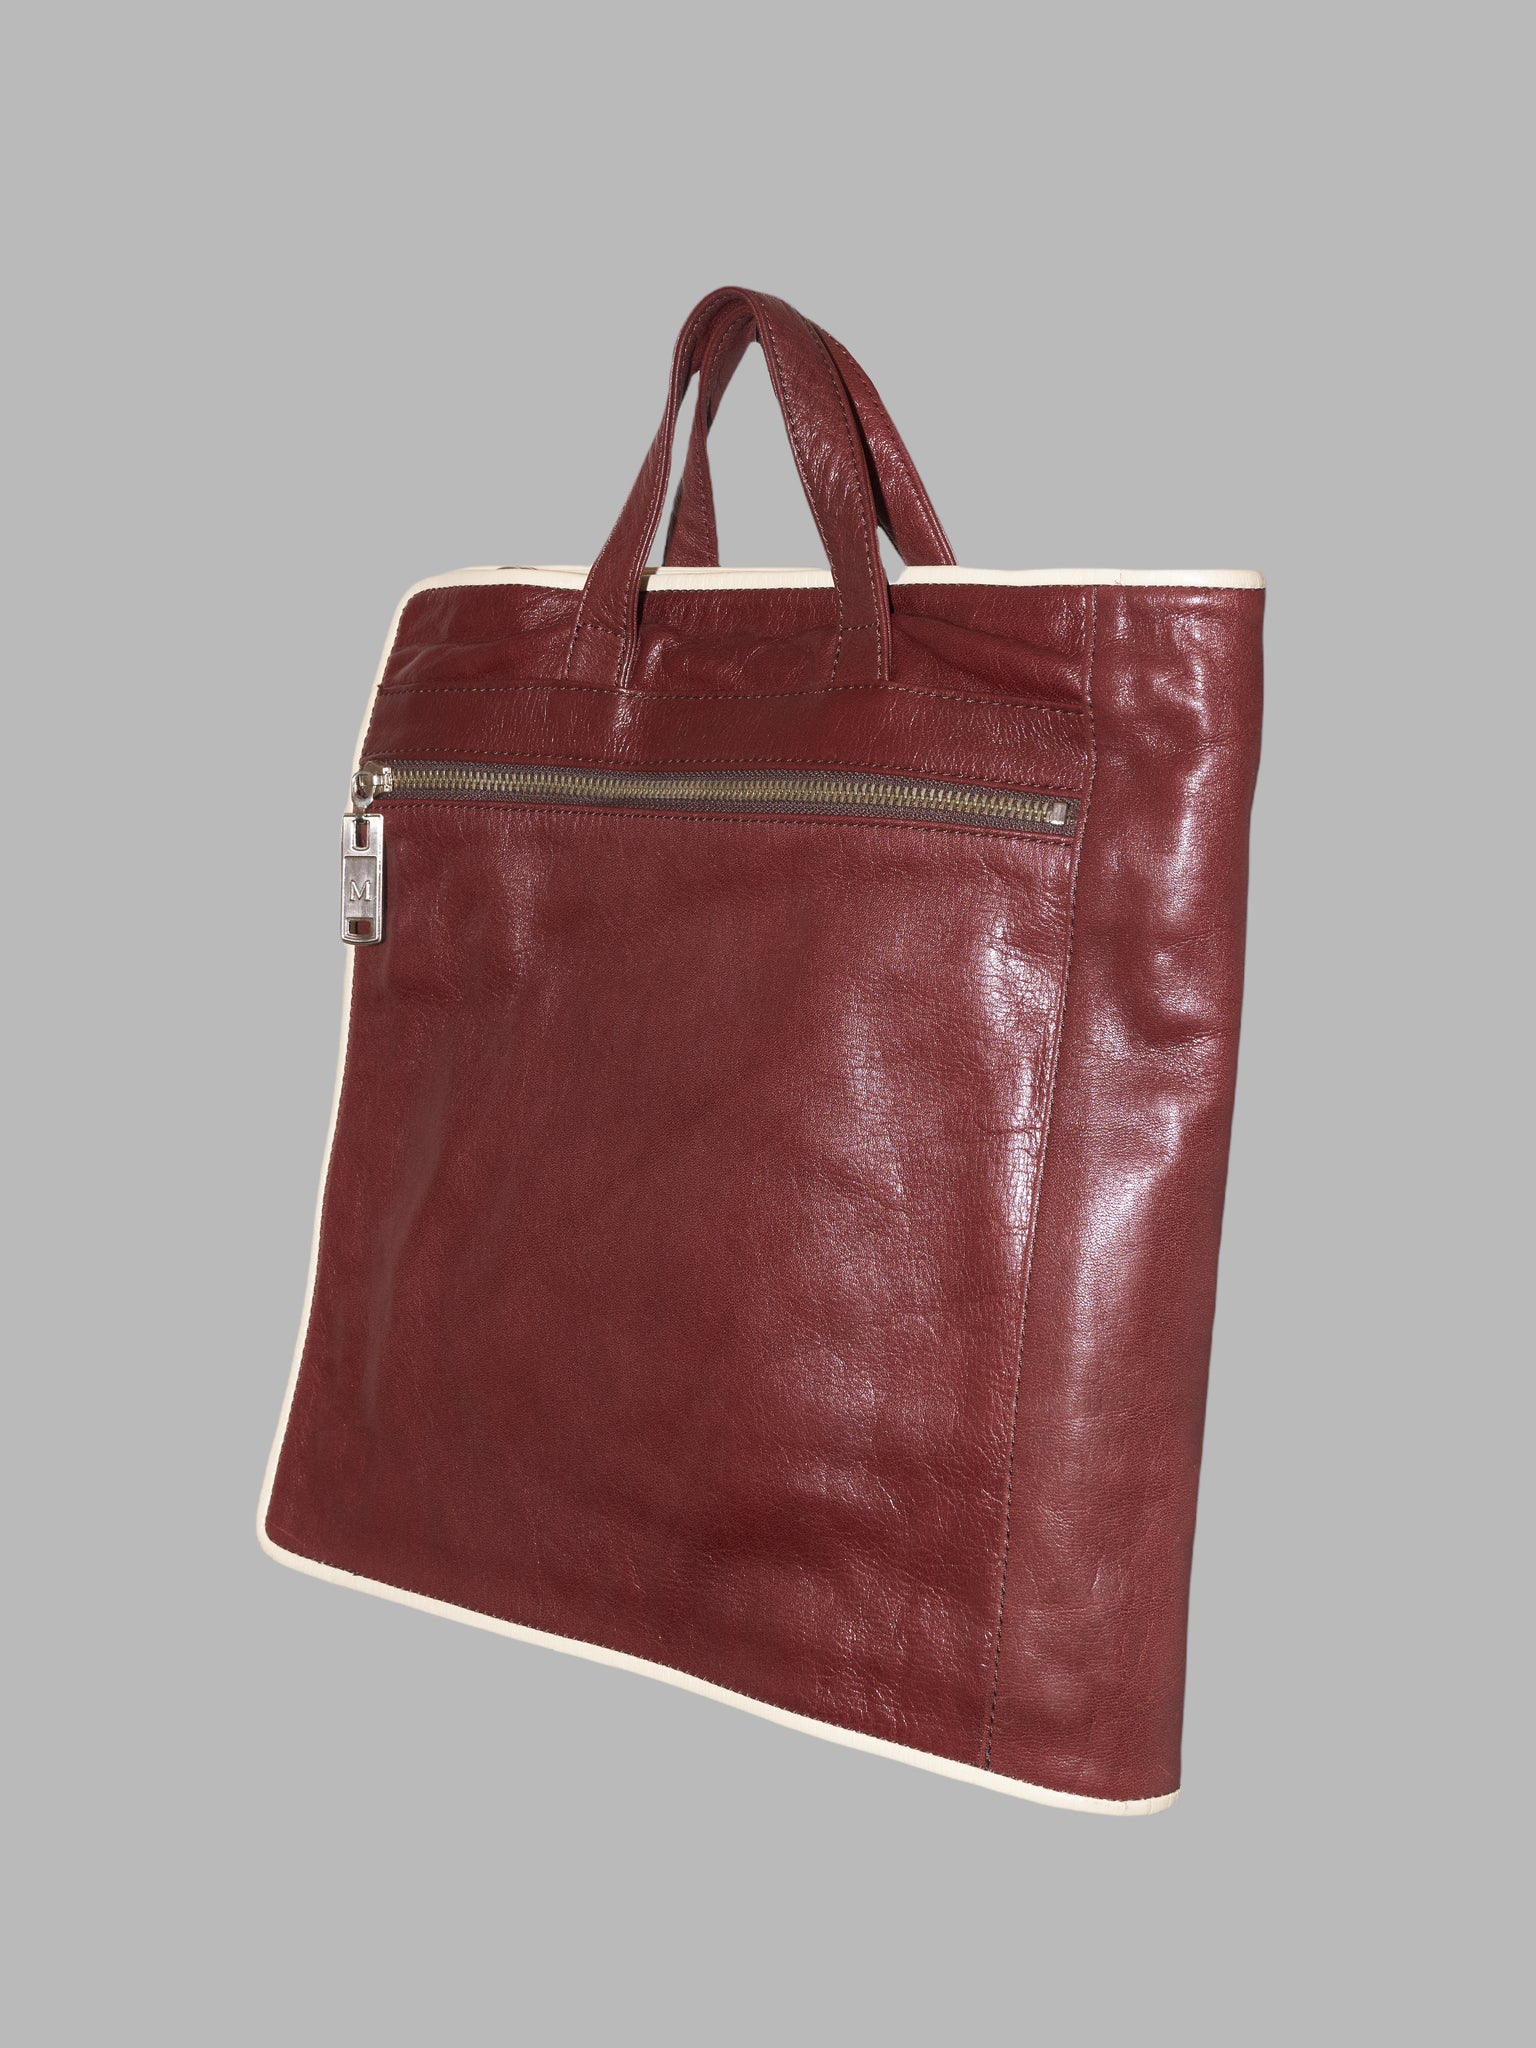 Masaki Matsushima Homme brown leather and canvas folded bag